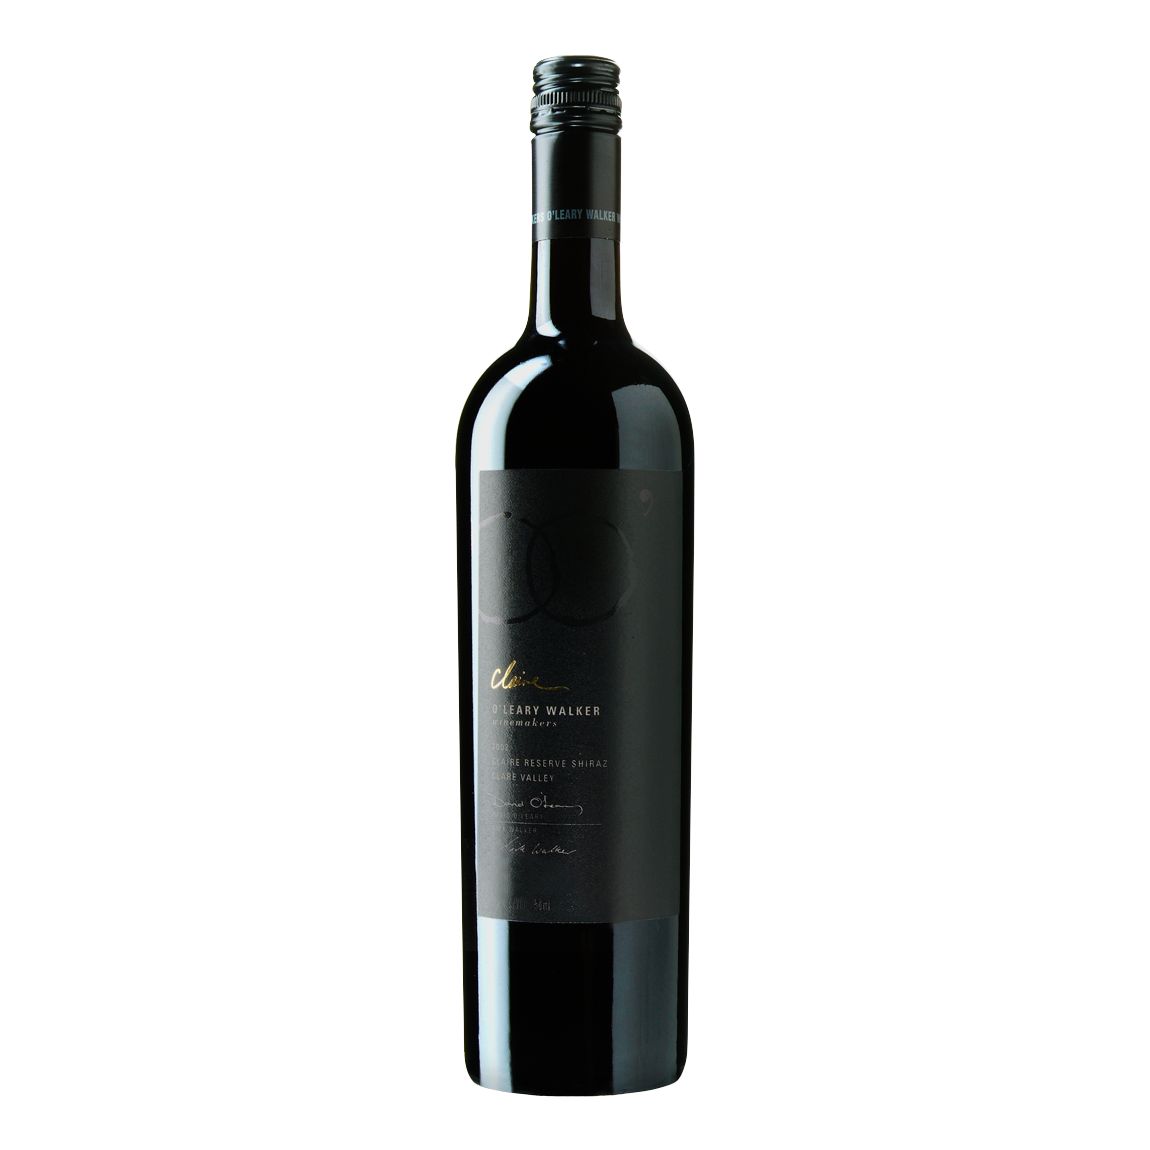 O'Leary Walker Claire Reserve Shiraz 2004 Clare Valley, Australia at JohnLewis